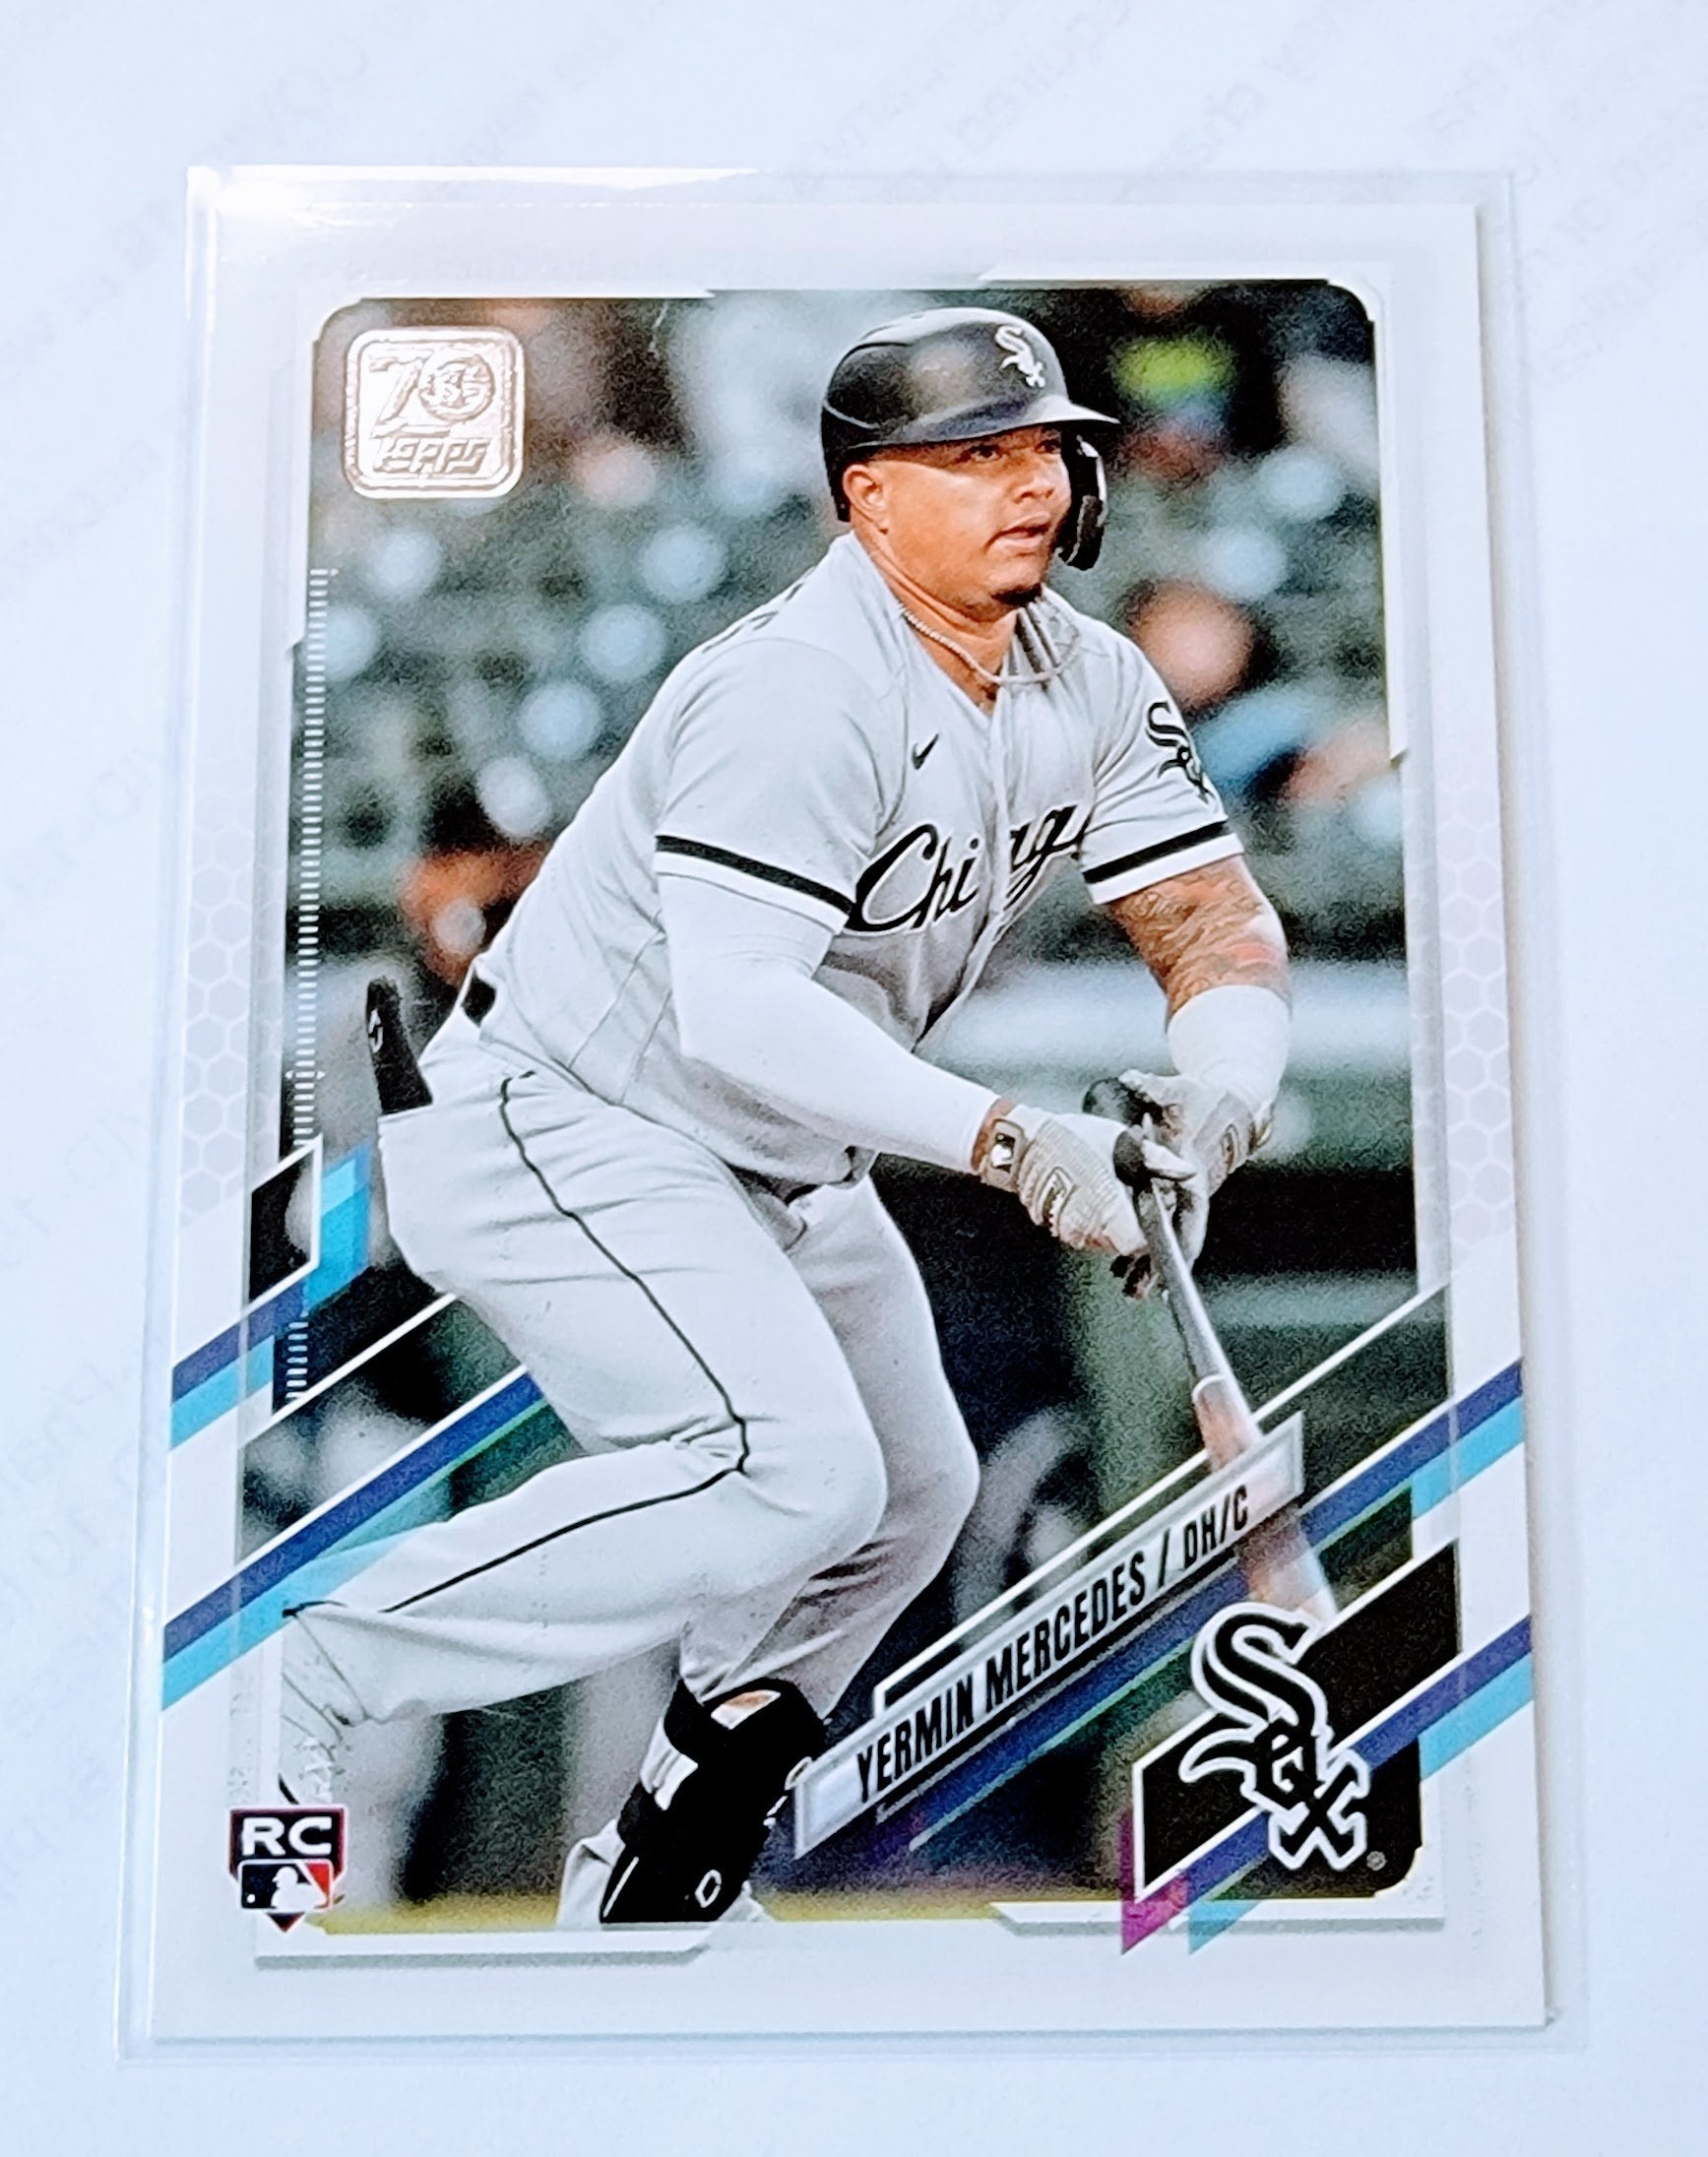 2021 Topps Update Yermin Mercedes Baseball Trading Card SMCB1 simple Xclusive Collectibles   